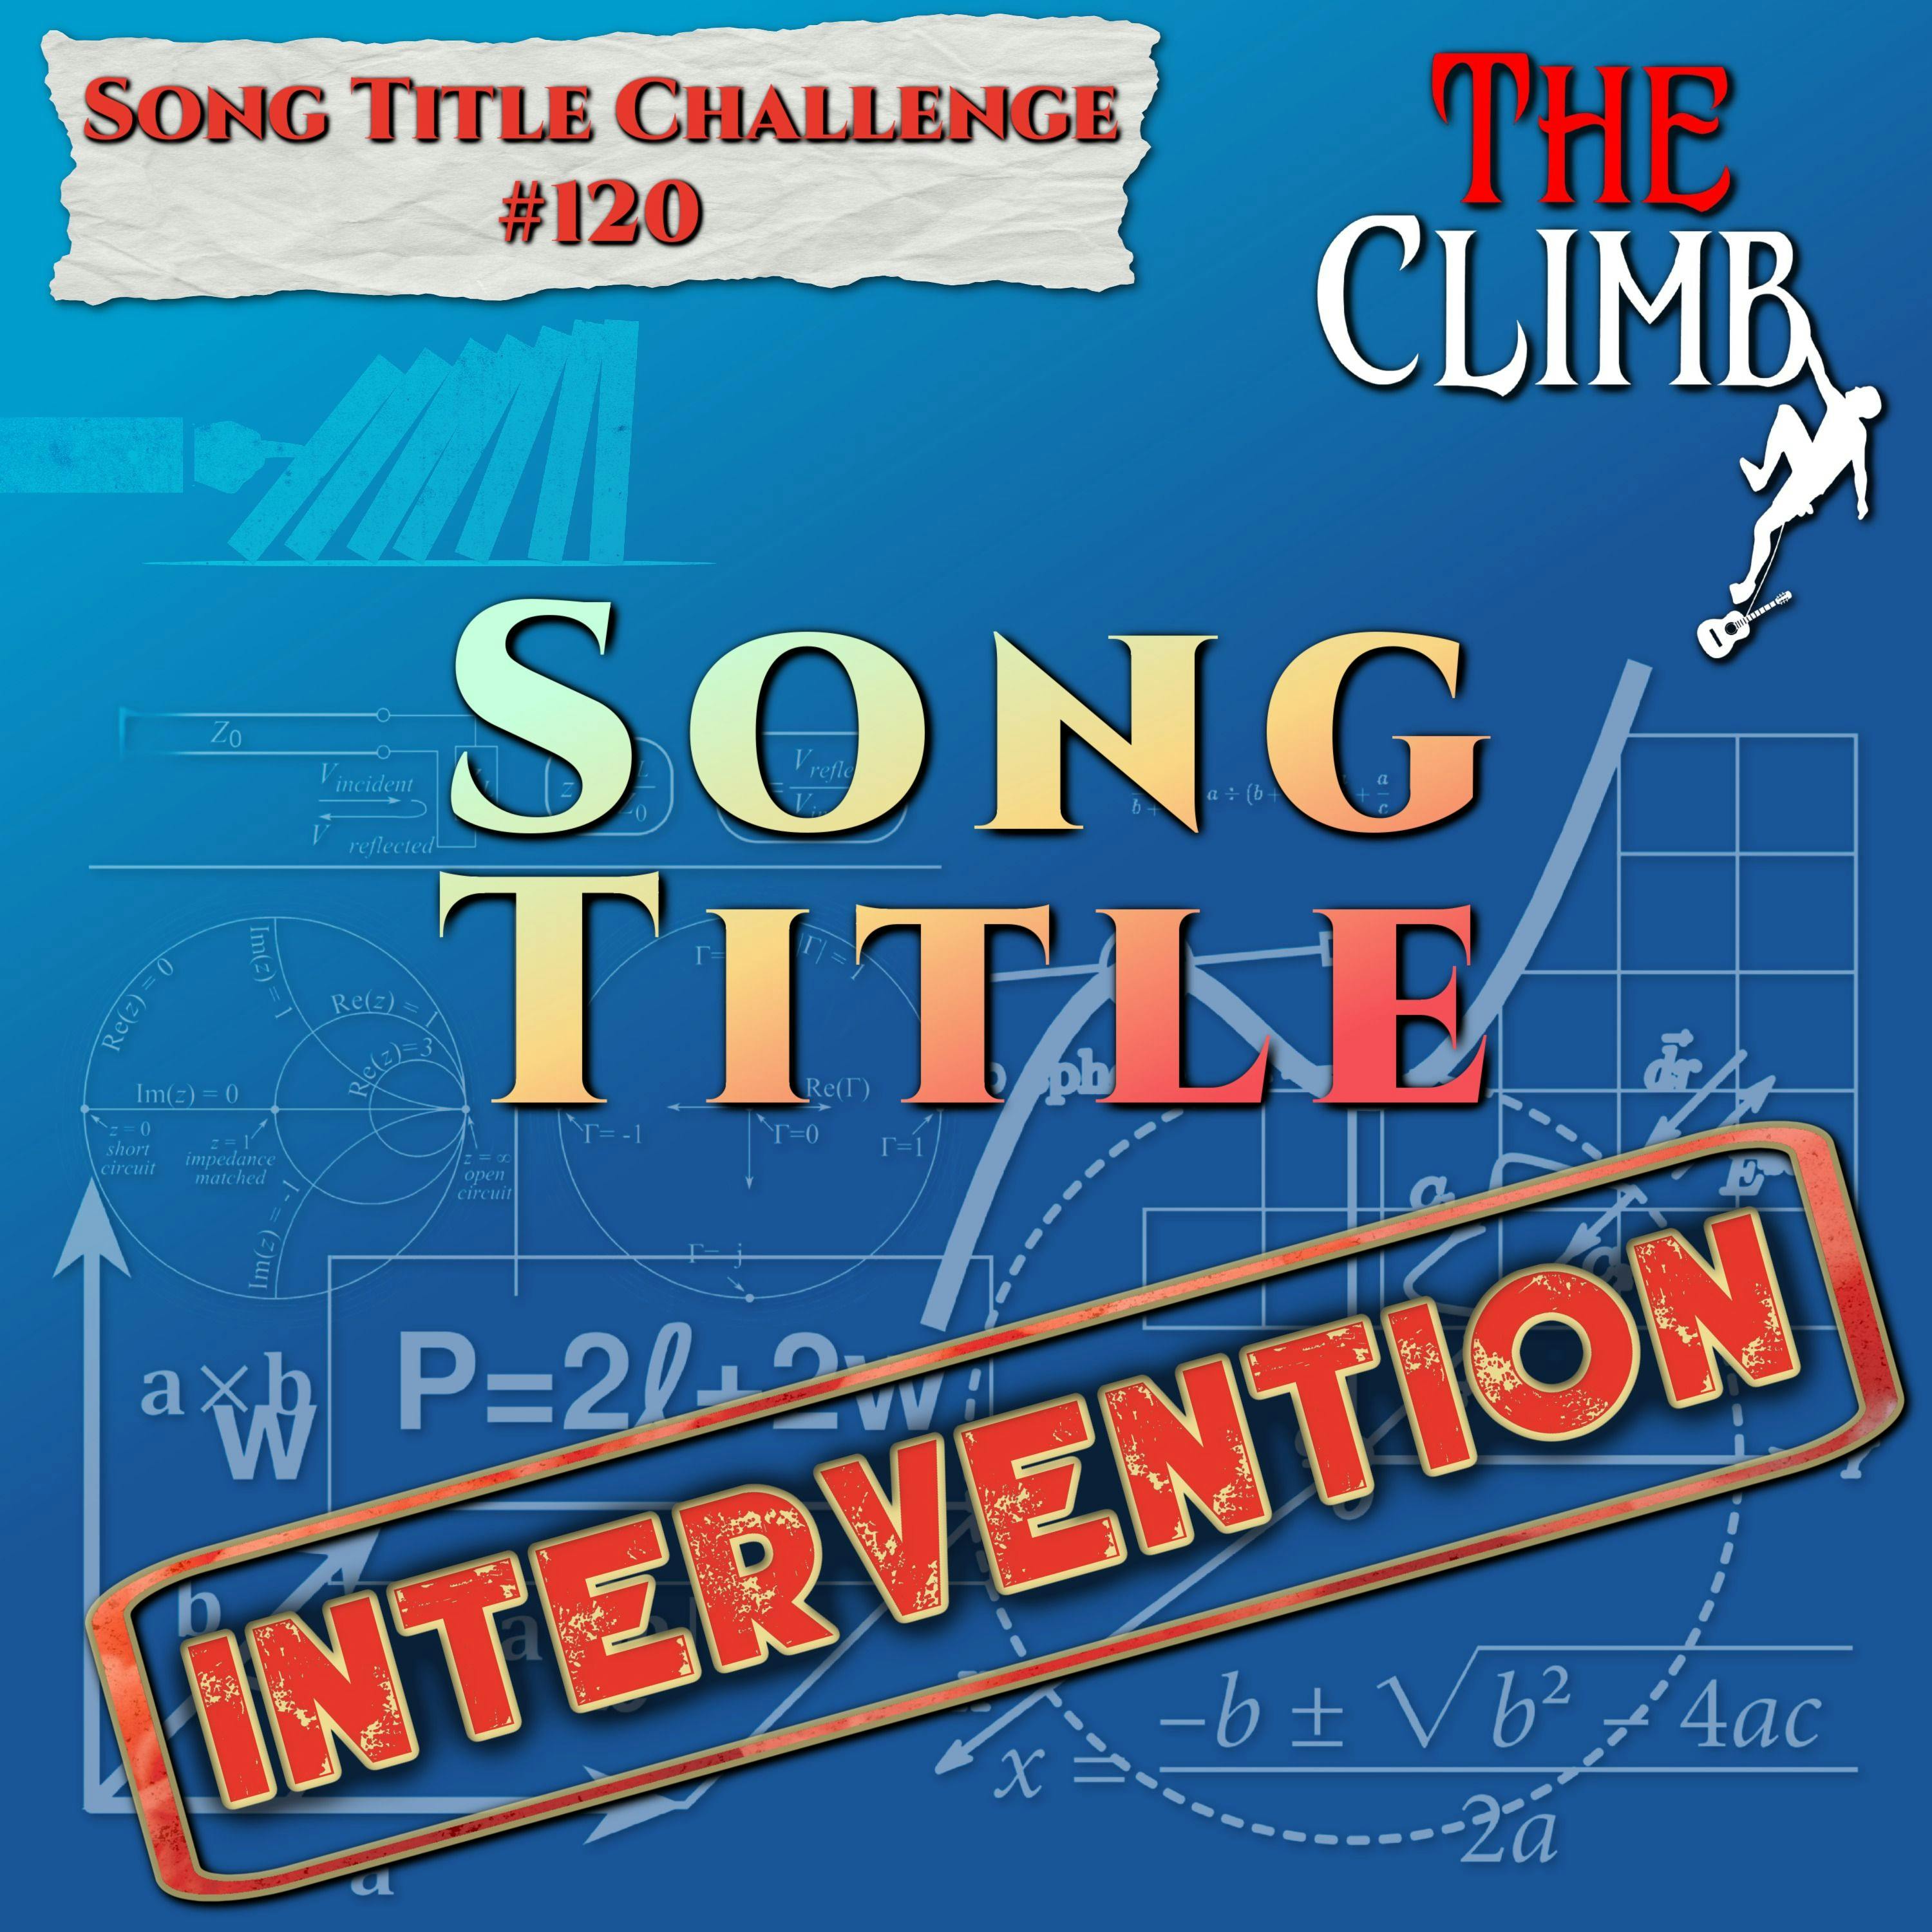 Song Title Challenge #120: Song Title INTERVENTION!